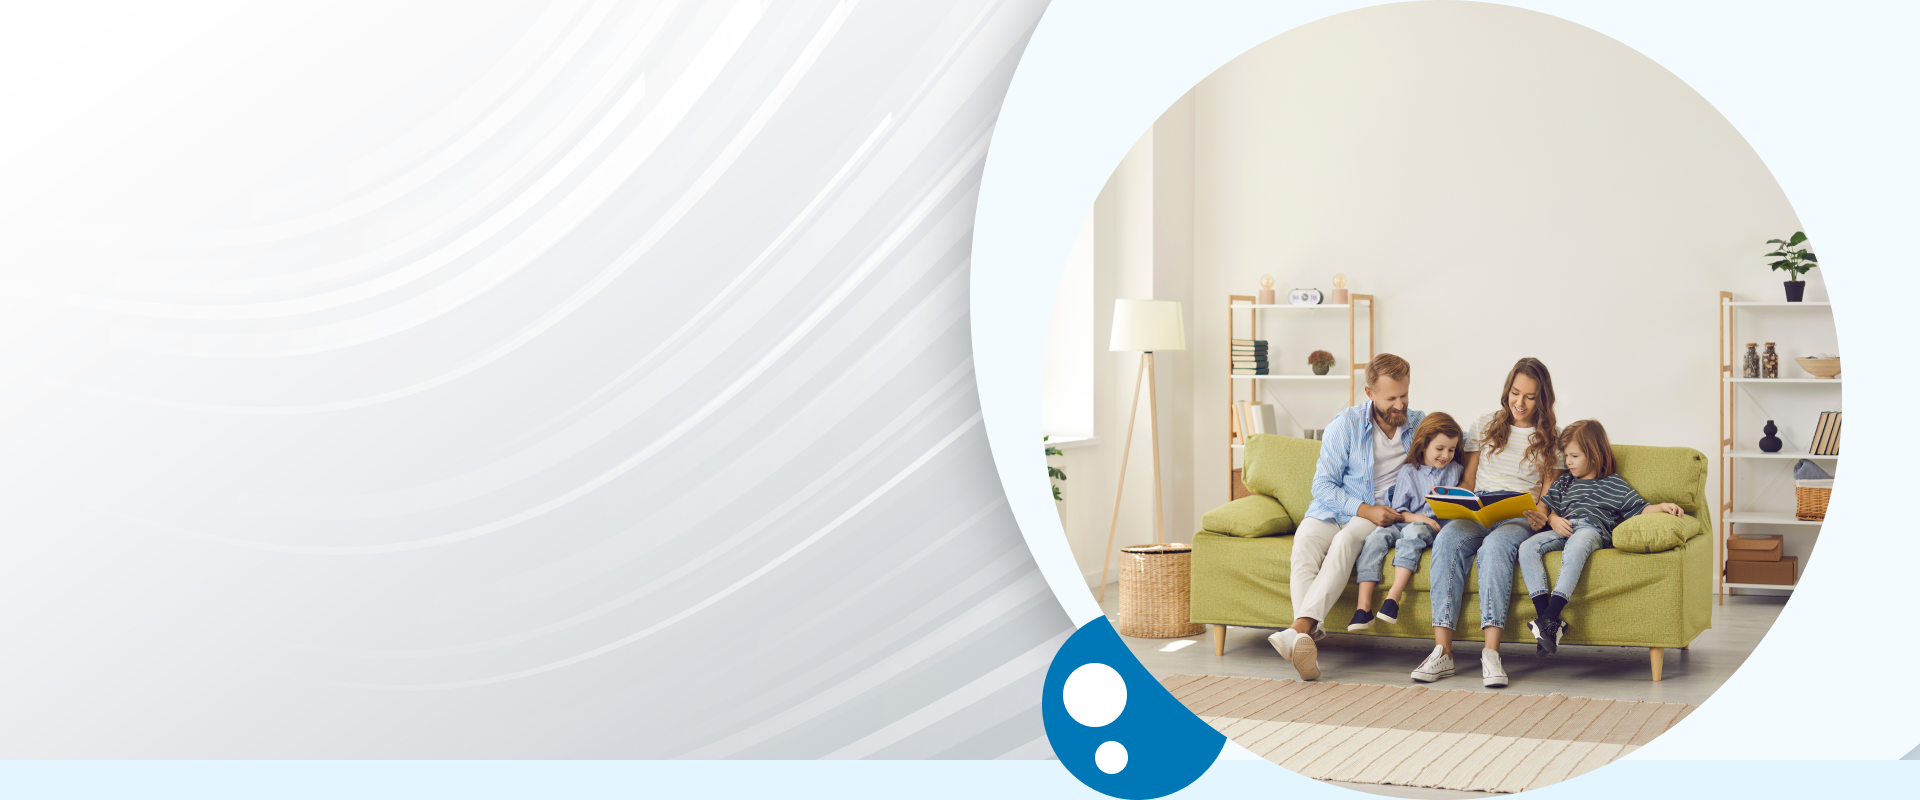 We revitalize your space with high quality Residential and Commercial Cleaning Services